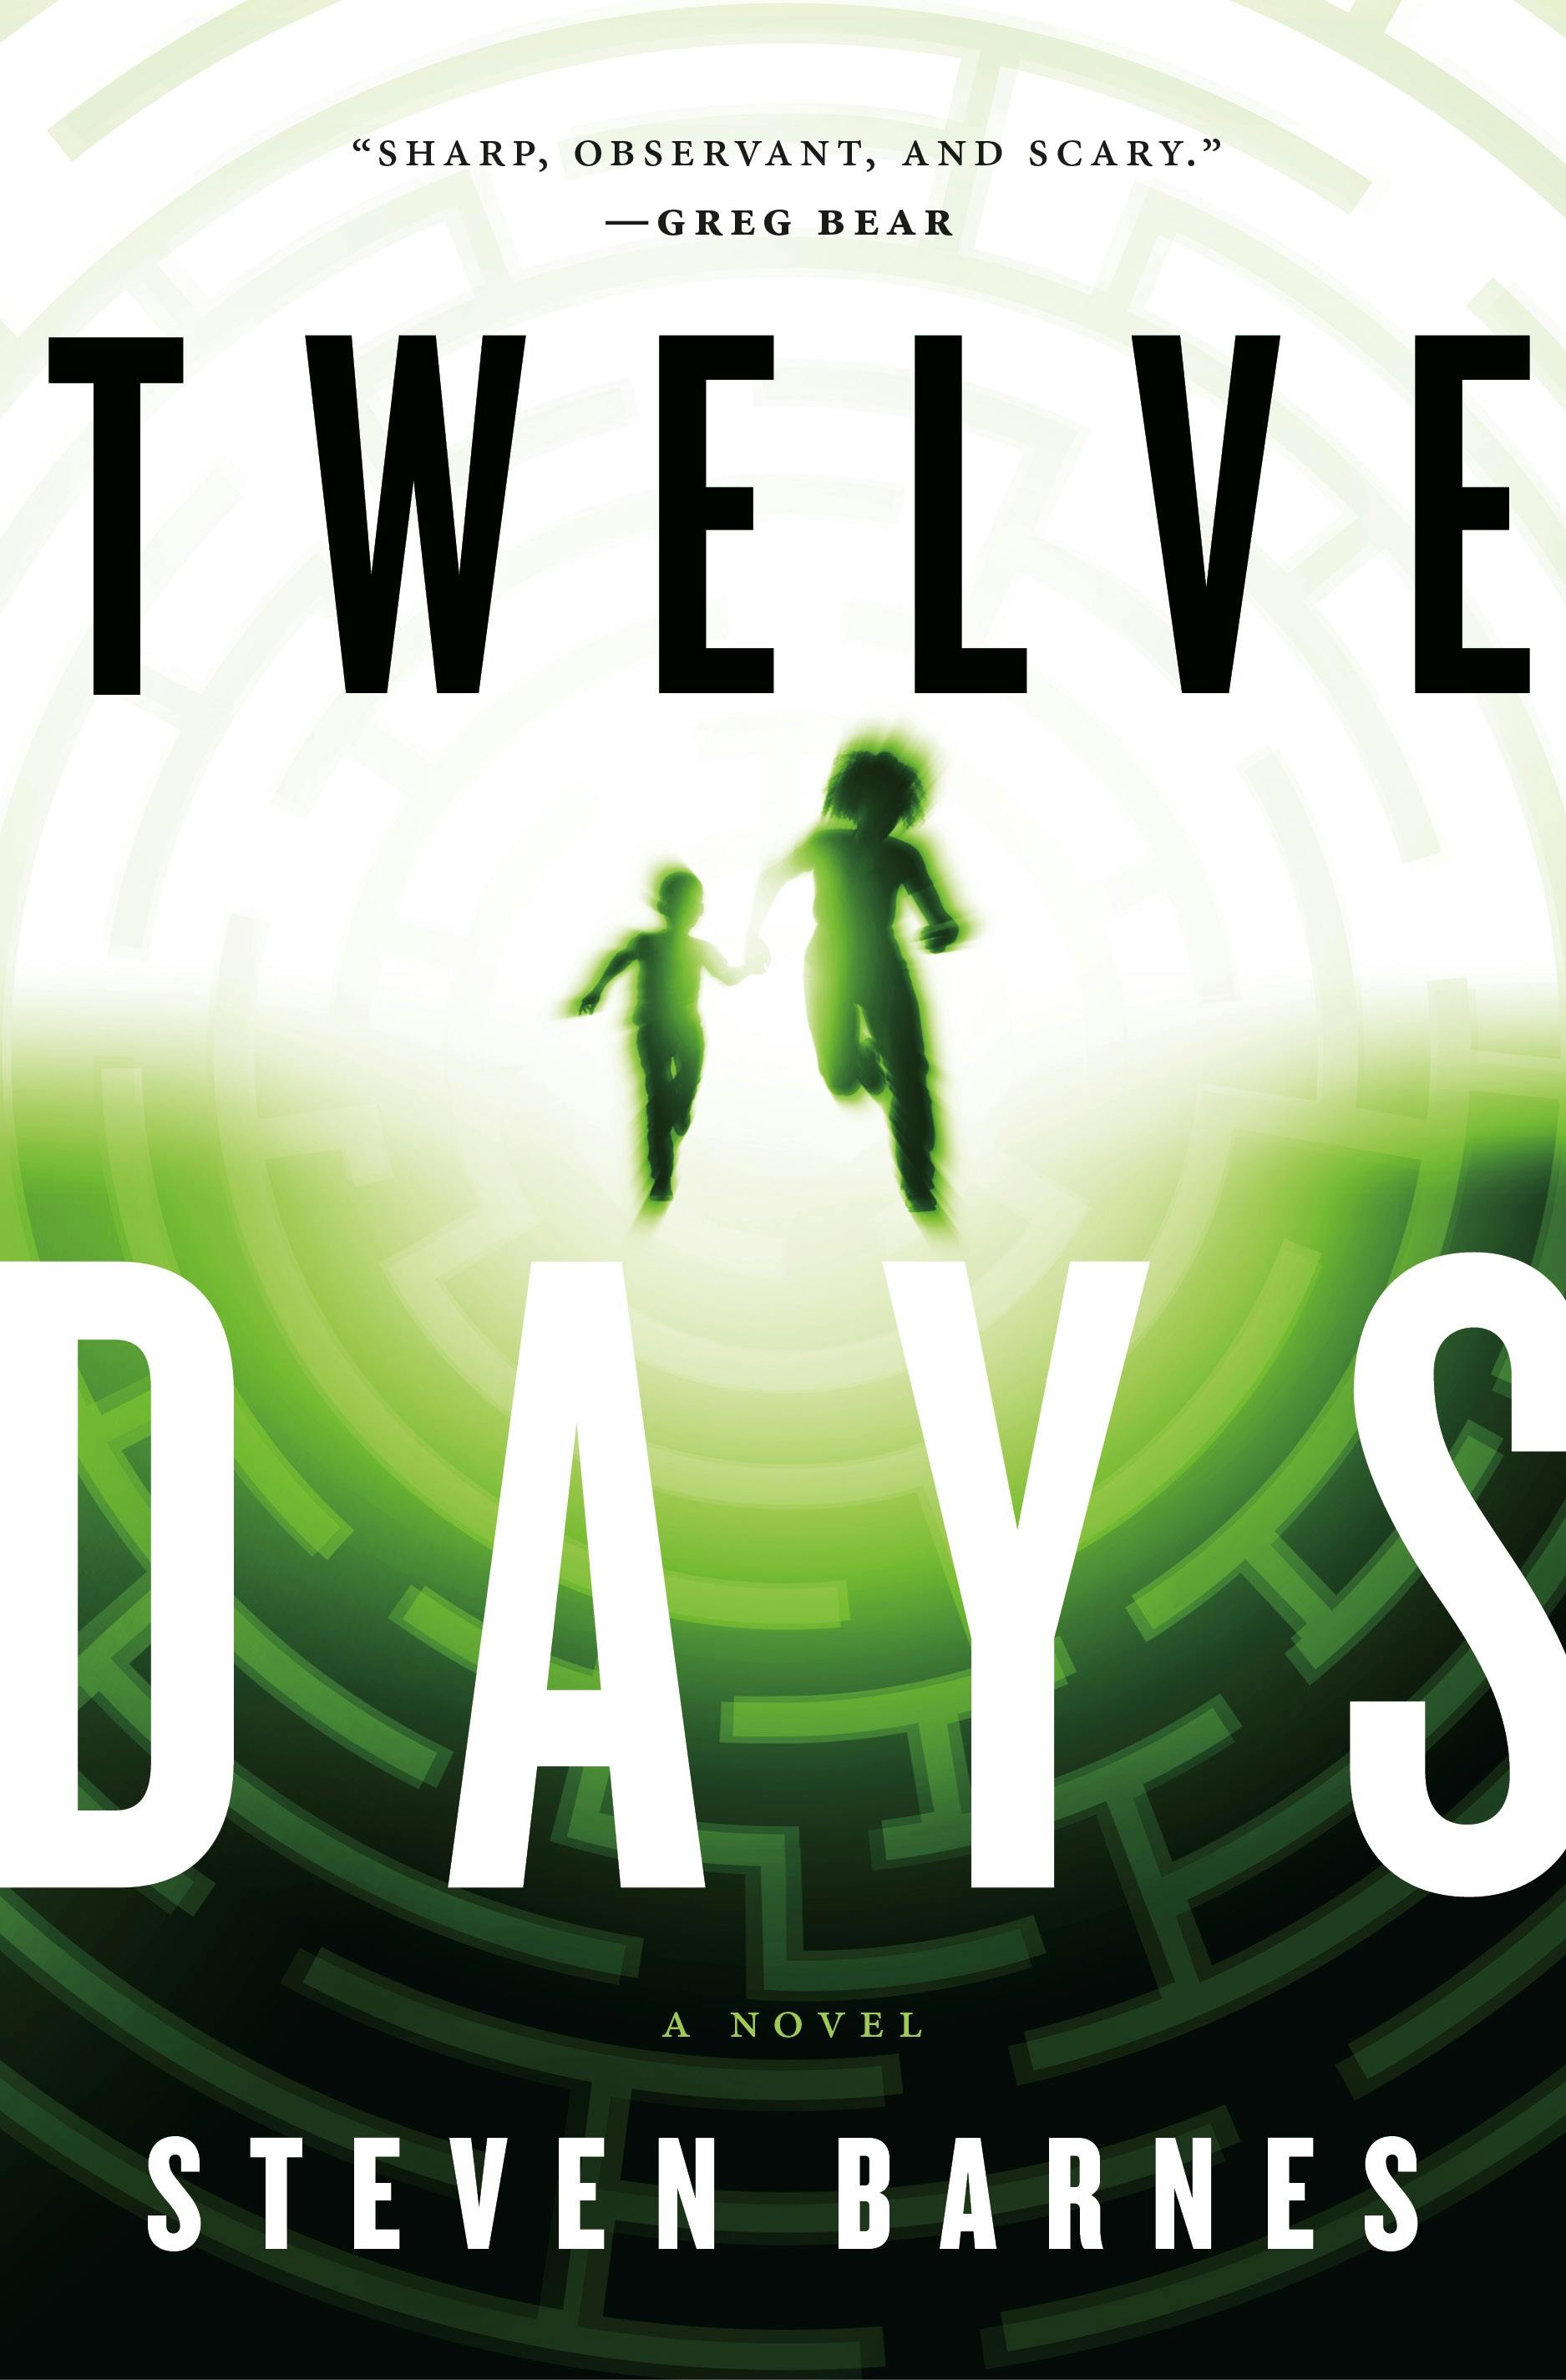 Cover for the book titled as: Twelve Days